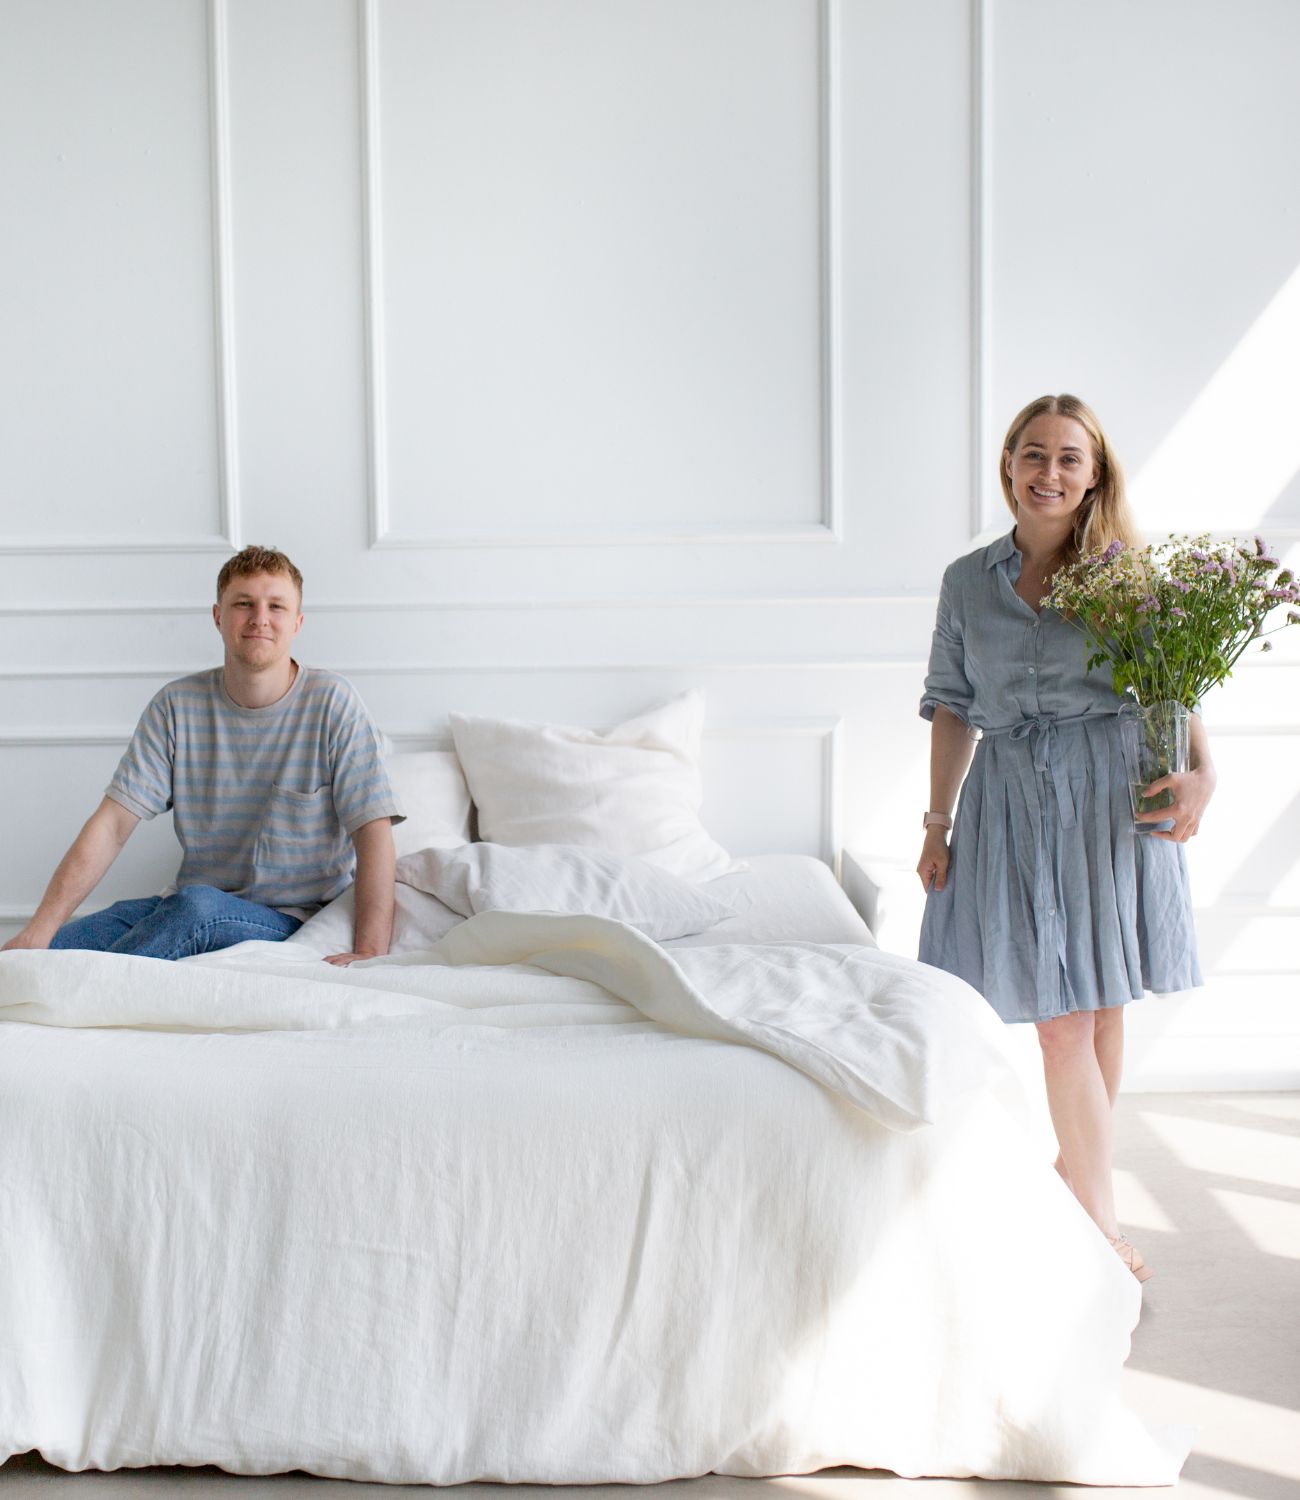 Owner and Co-Owner of Amour Linen Happily Posing In White Room